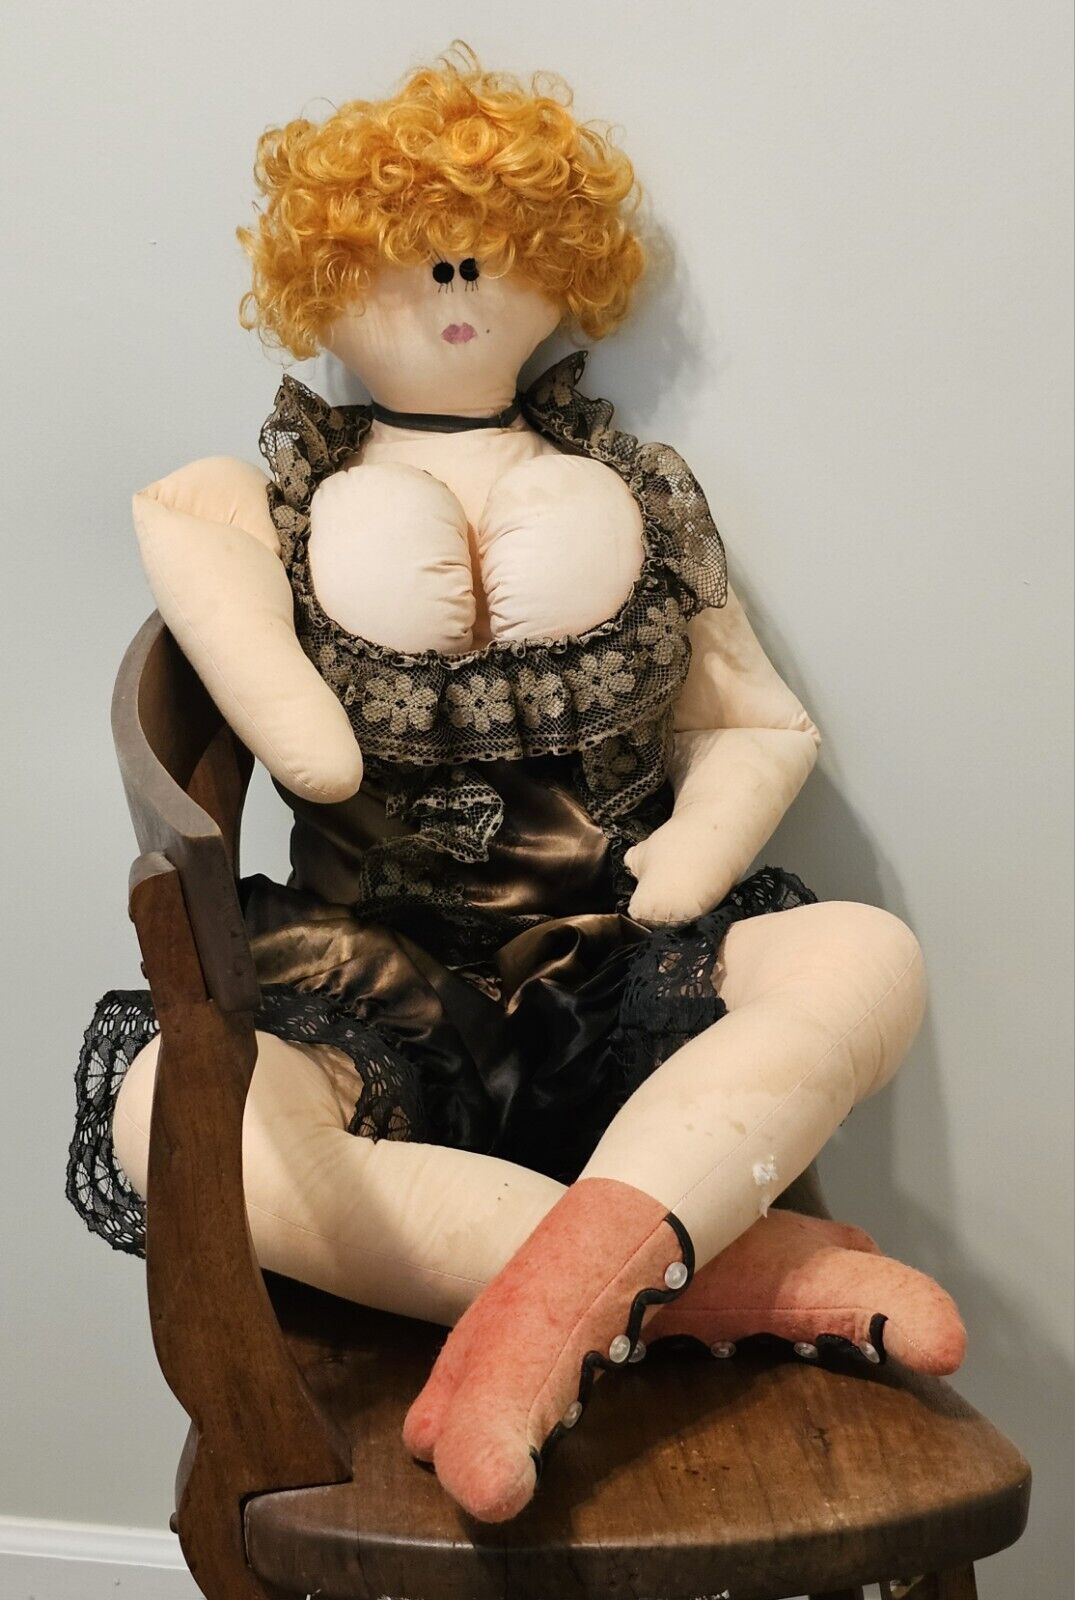 Big Buxom Ginger Unique 3 Foot Tall Bar Maid Serving Wench Doll 